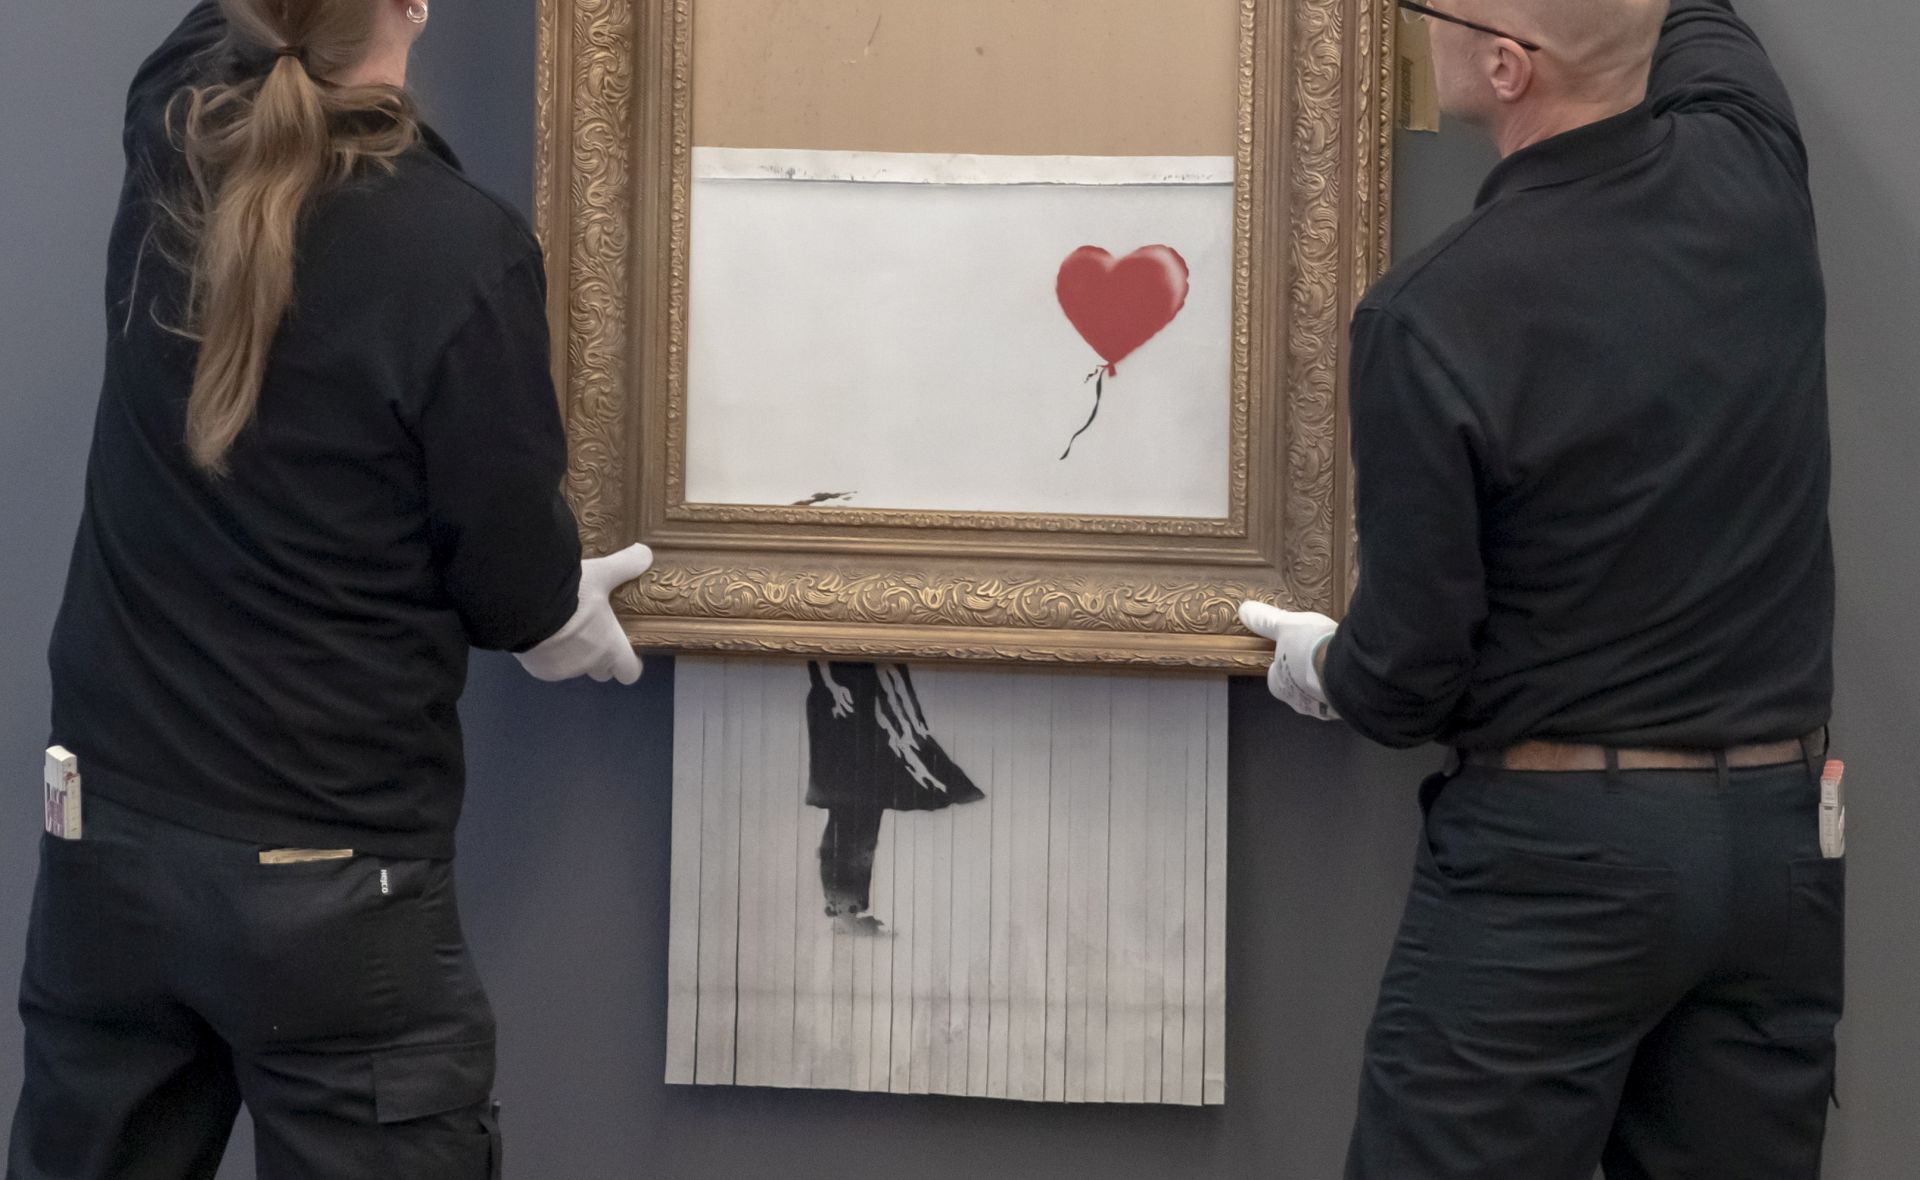 epa07342914 Museum employees hang Banksy's 'Love is in the Bin' artwork at the Frieder Burda Museum in Baden-Baden., Germany, 04 February 2019. The Frieder Burda Museum will be showing from 05 February 2019 to 03 March 2019 to the public for the first time the Banksy work 'Love is in the Bin', acquired by a European collector and auctioned off at Sotheby's in London.  EPA/RONALD WITTEK